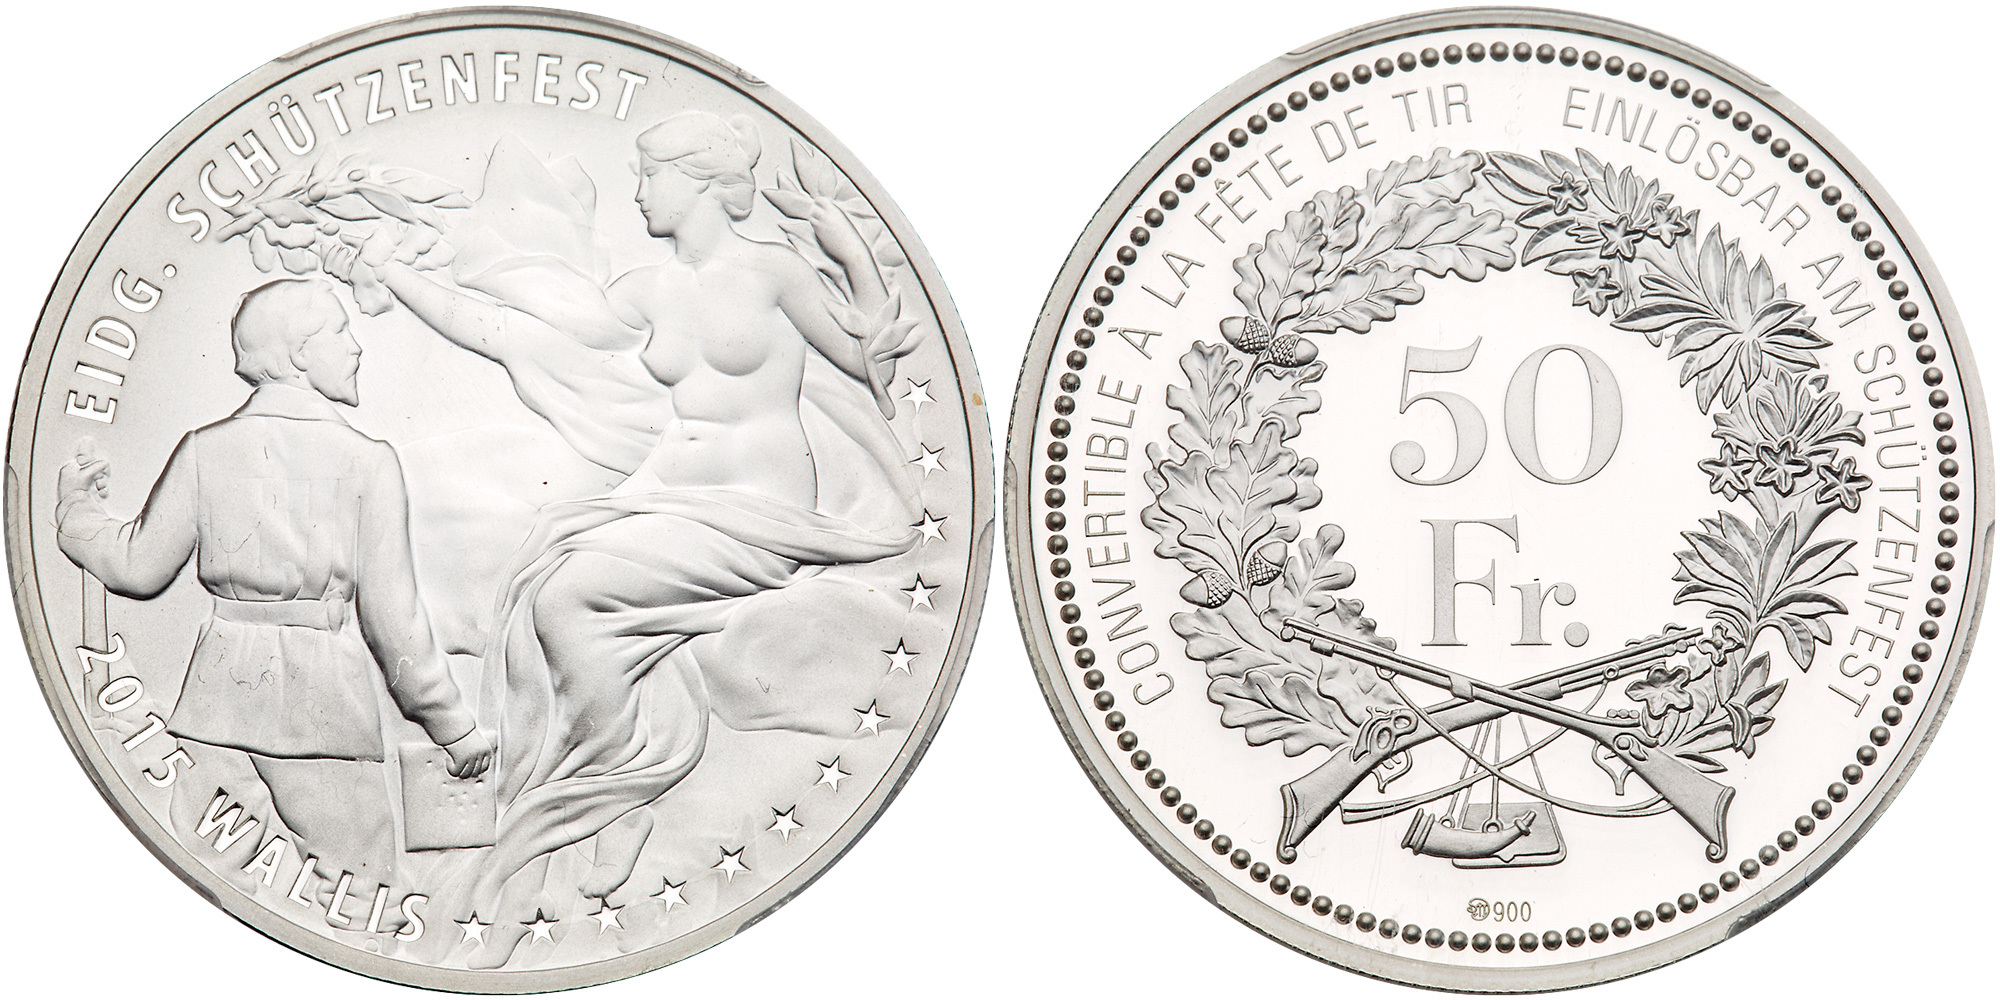 Switzerland. 50 Francs, 2015. Hab-93a. Silver. For the Wallis Shooting Festival. PCGS graded Proof